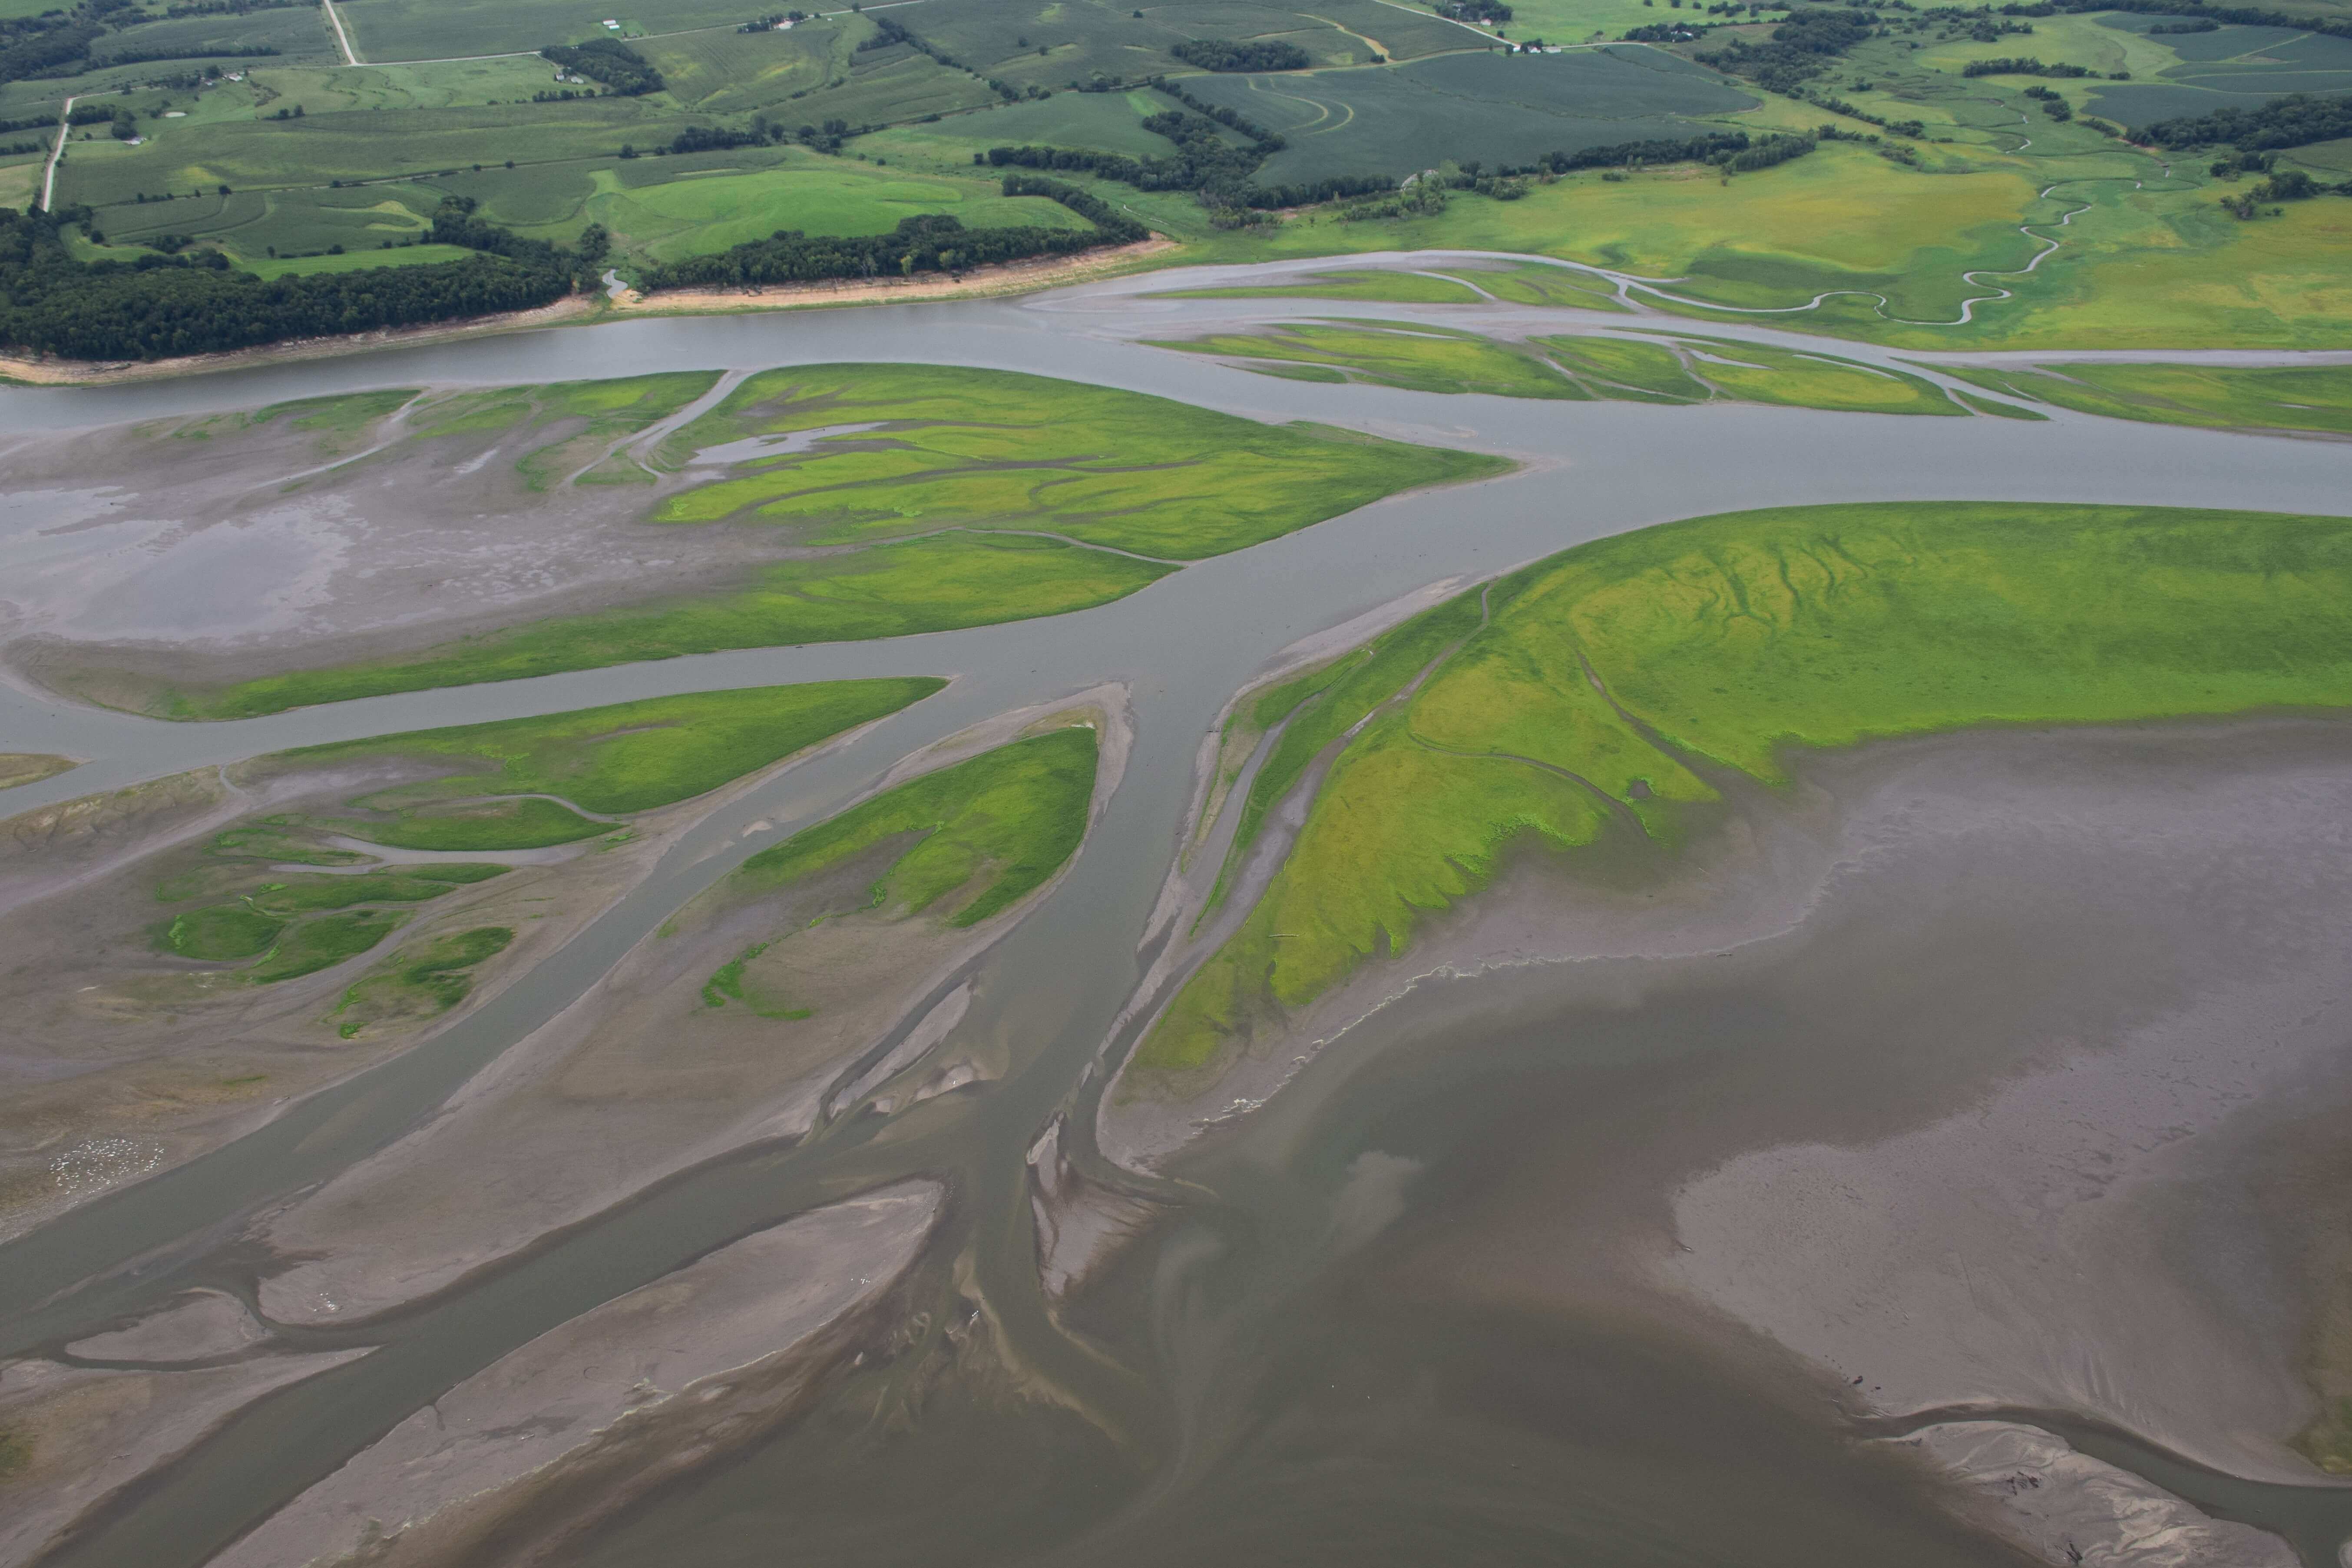 Aerial photo of Lake Red Rock delta. Reservoir delta areas can be managed as shallow wetlands, reducing nutrients, improving water quality, and providing habitat and forage for a variety of birds.